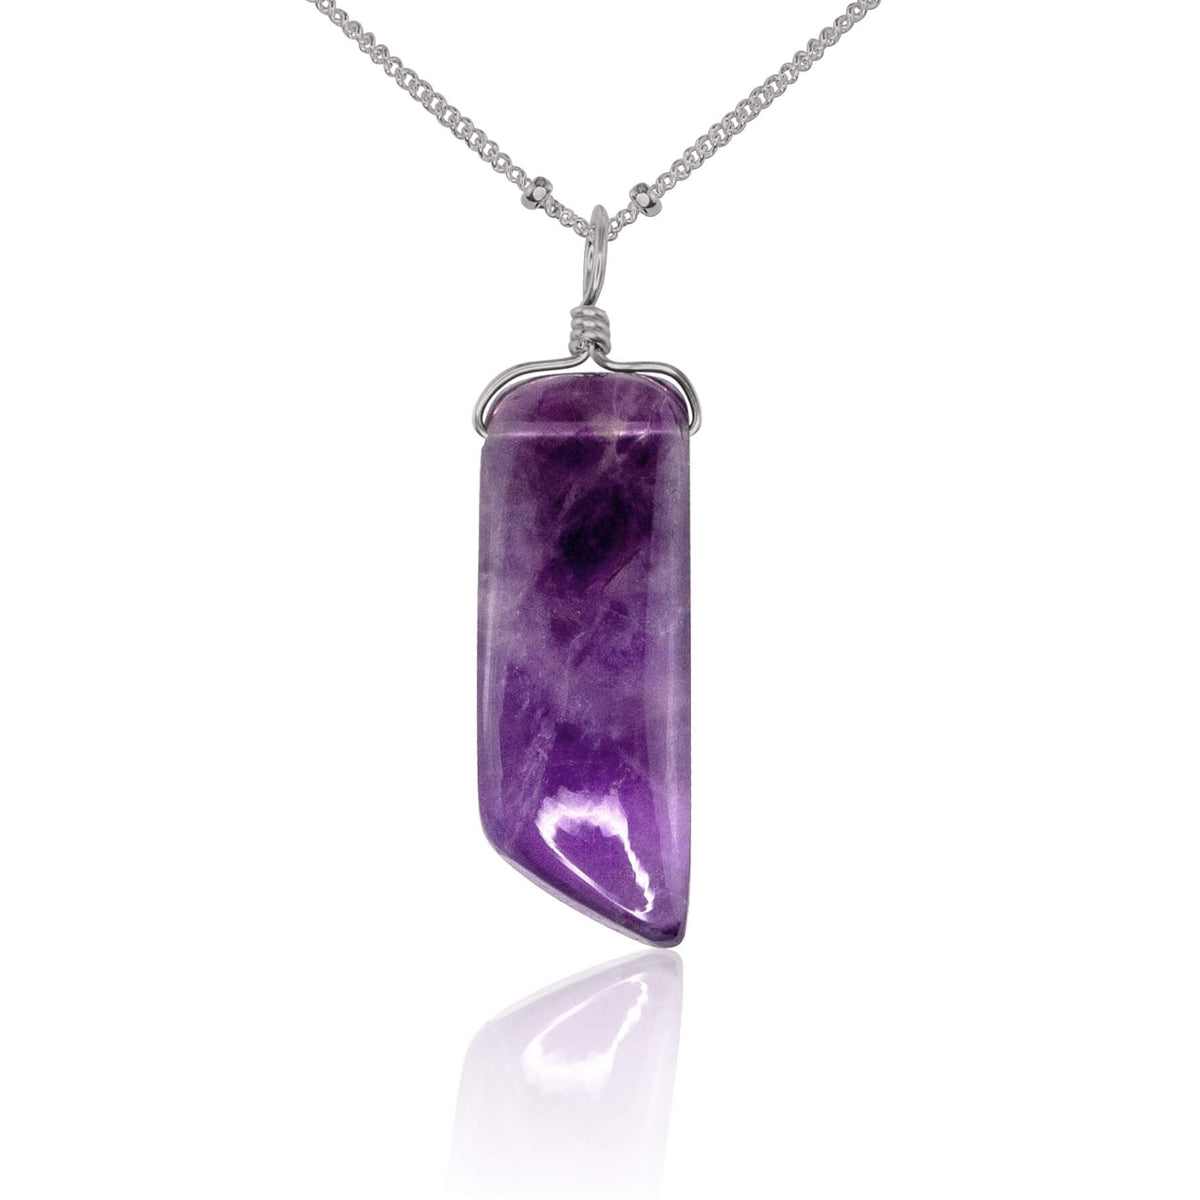 Smooth Point Pendant Necklace - Amethyst - Stainless Steel Satellite - Luna Tide Handmade Jewellery